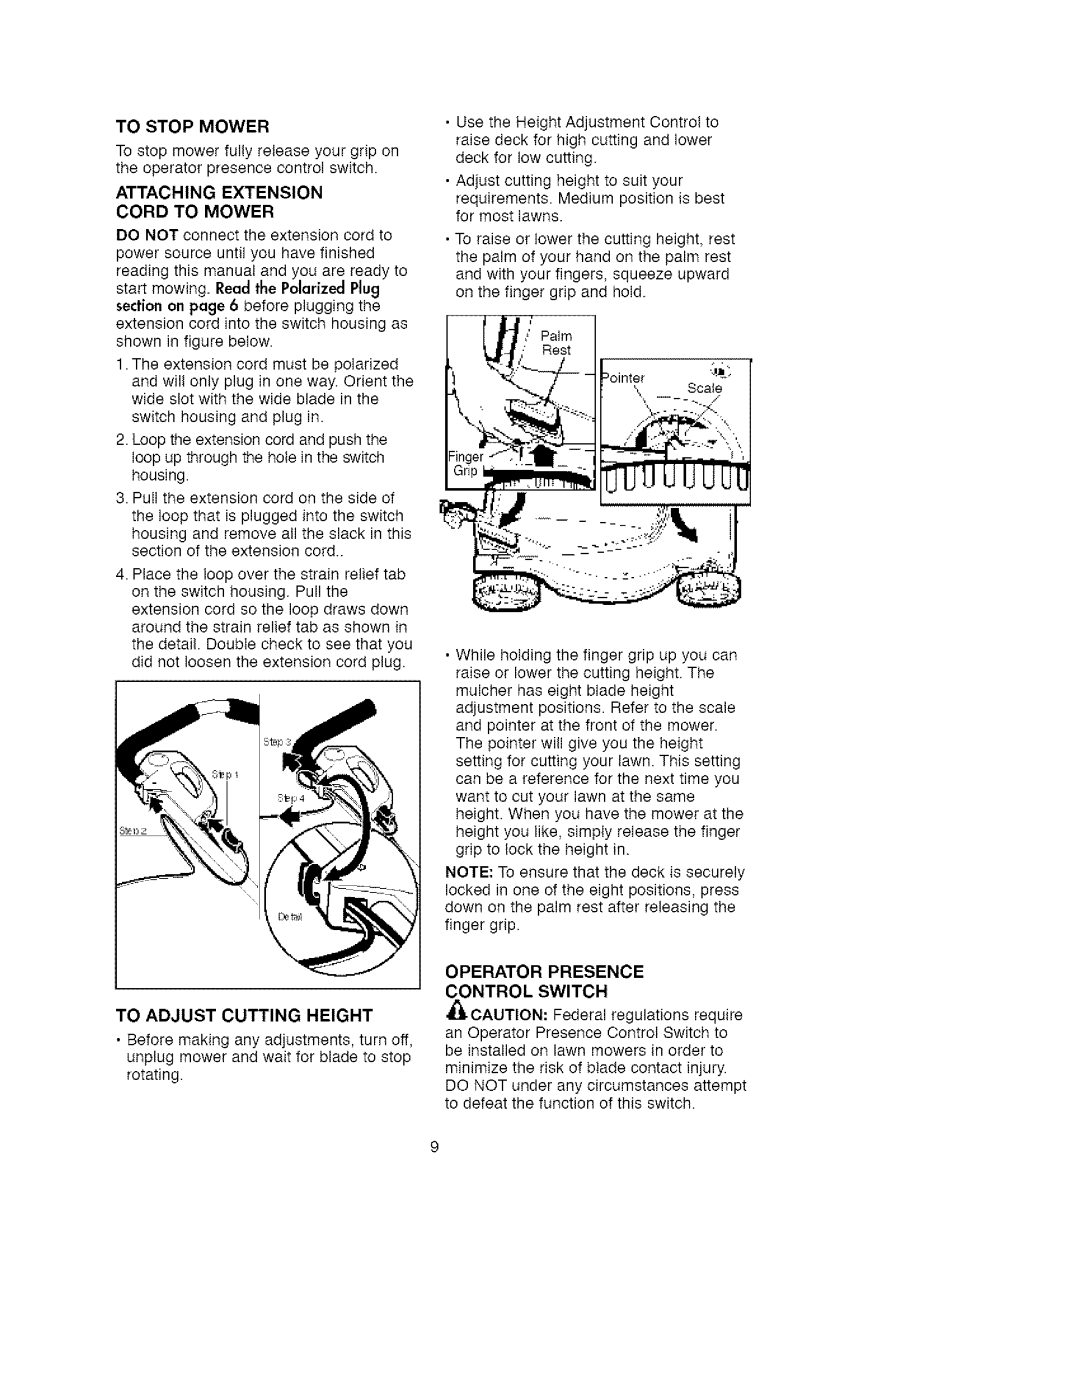 Craftsman 900.370511 manual To Stop Mower, Attaching Extension Cord To Mower, To Adjust Cutting Height, Control Switch 